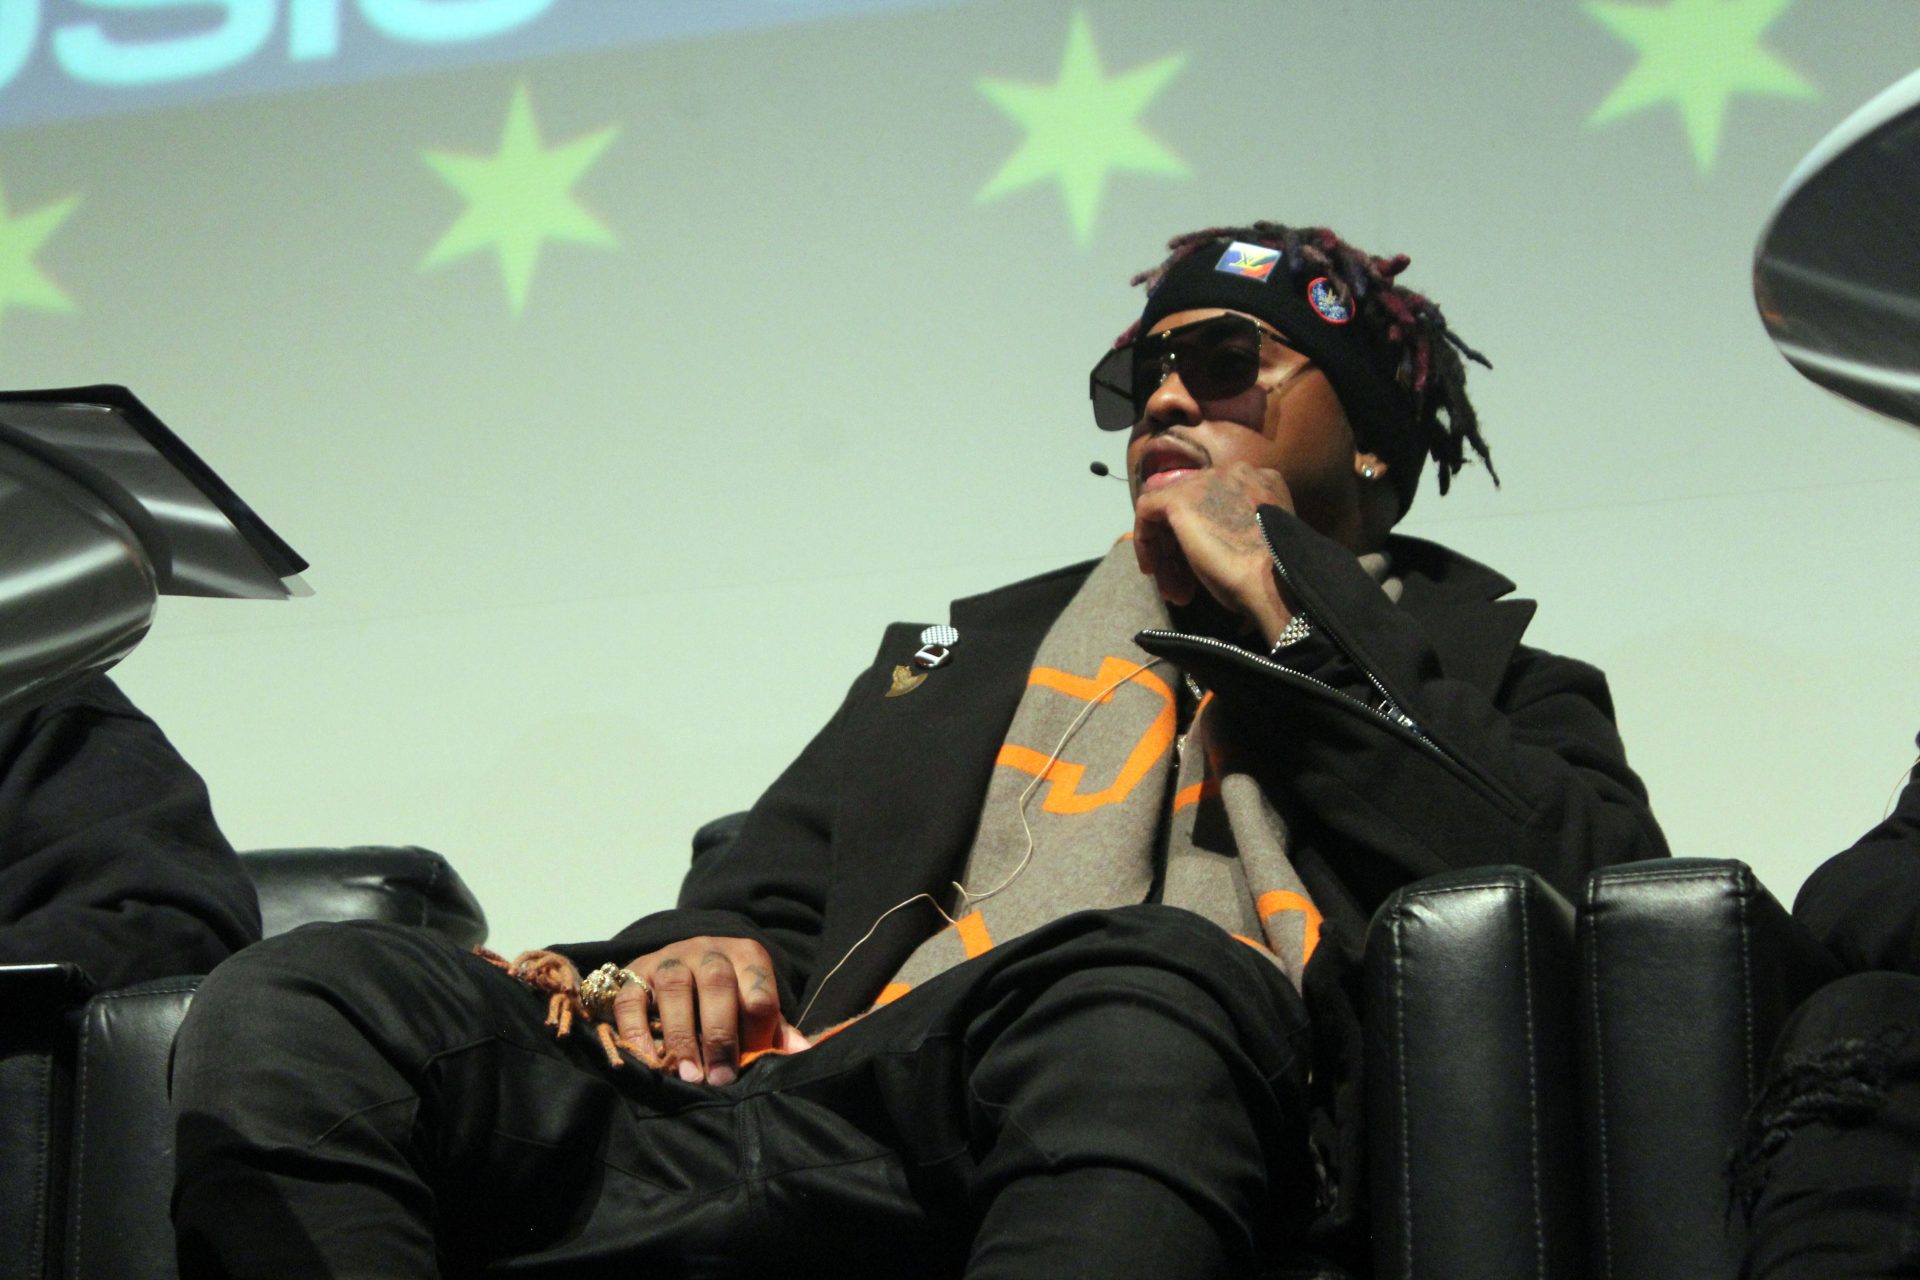 Jeremih shares his hit-making strategy at WGCI Music Summit in Chicago